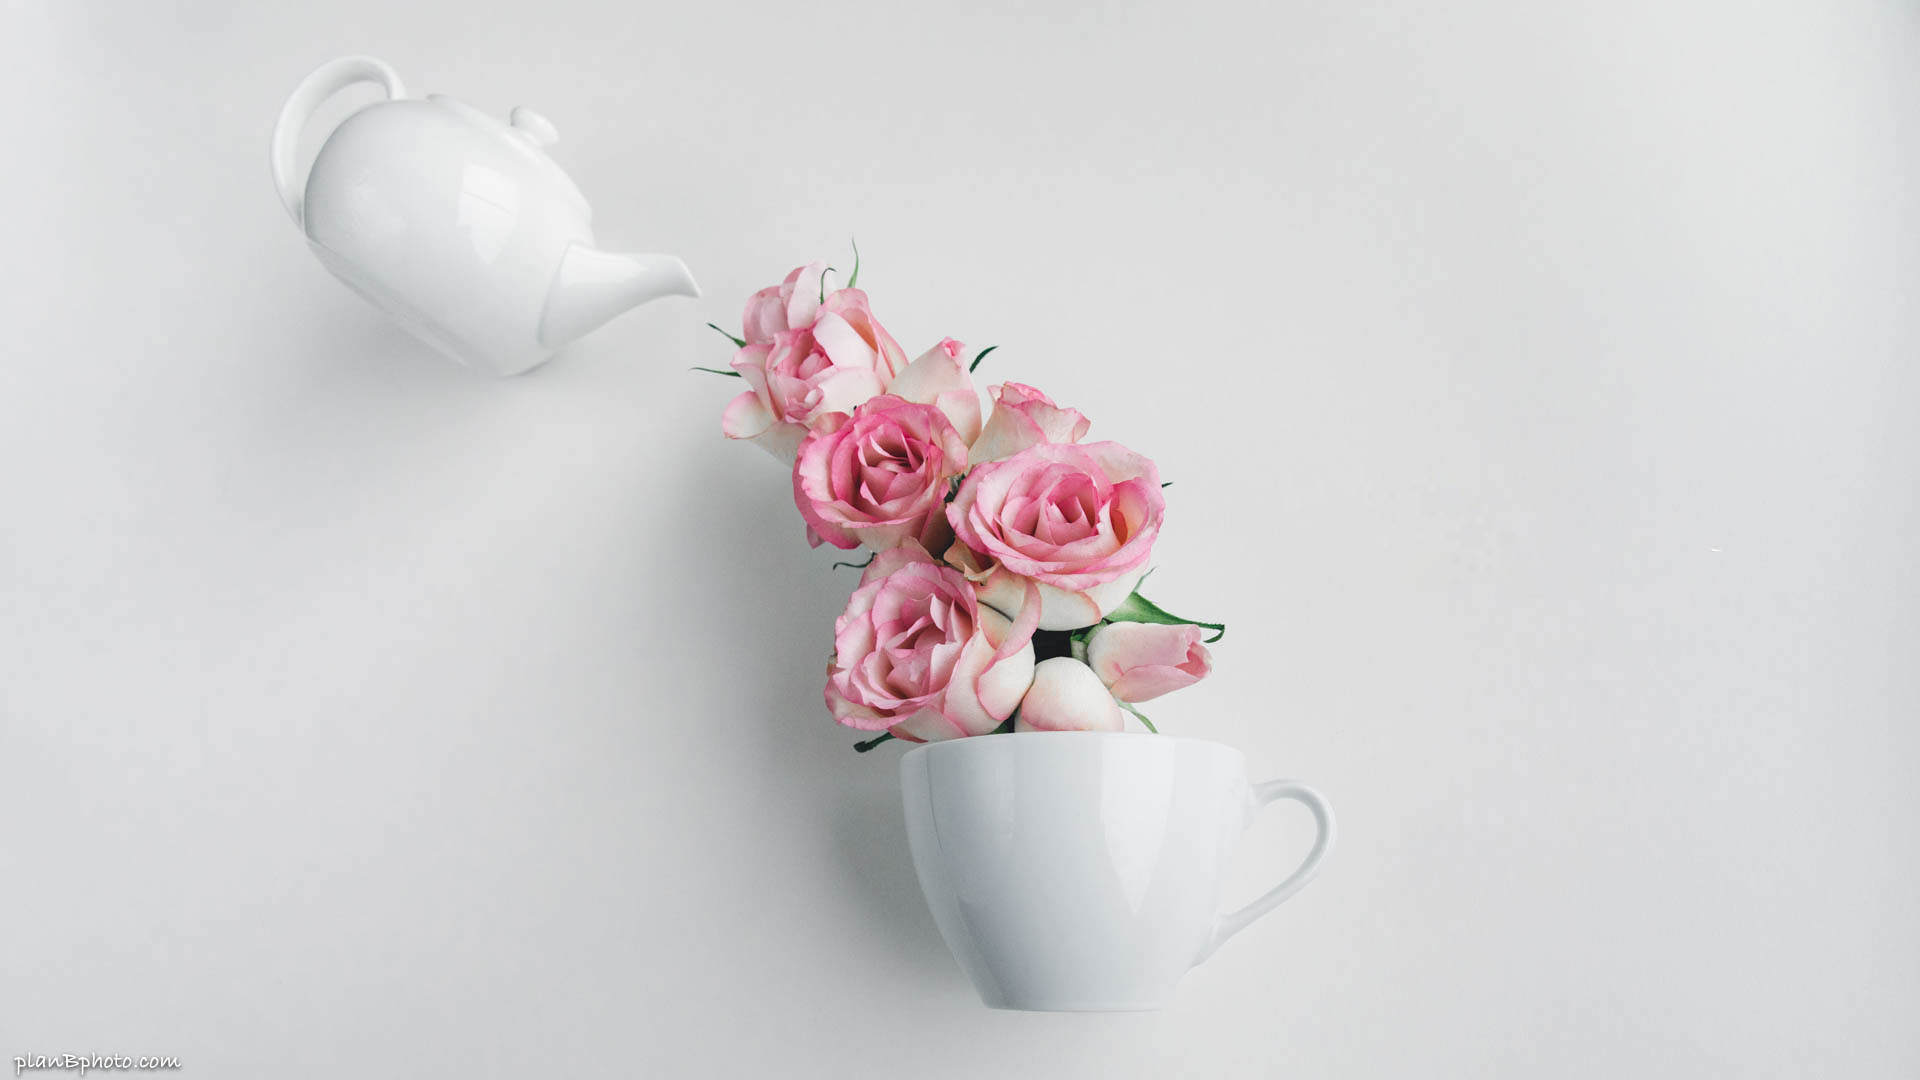 Light pink roses in a tea cup floral background